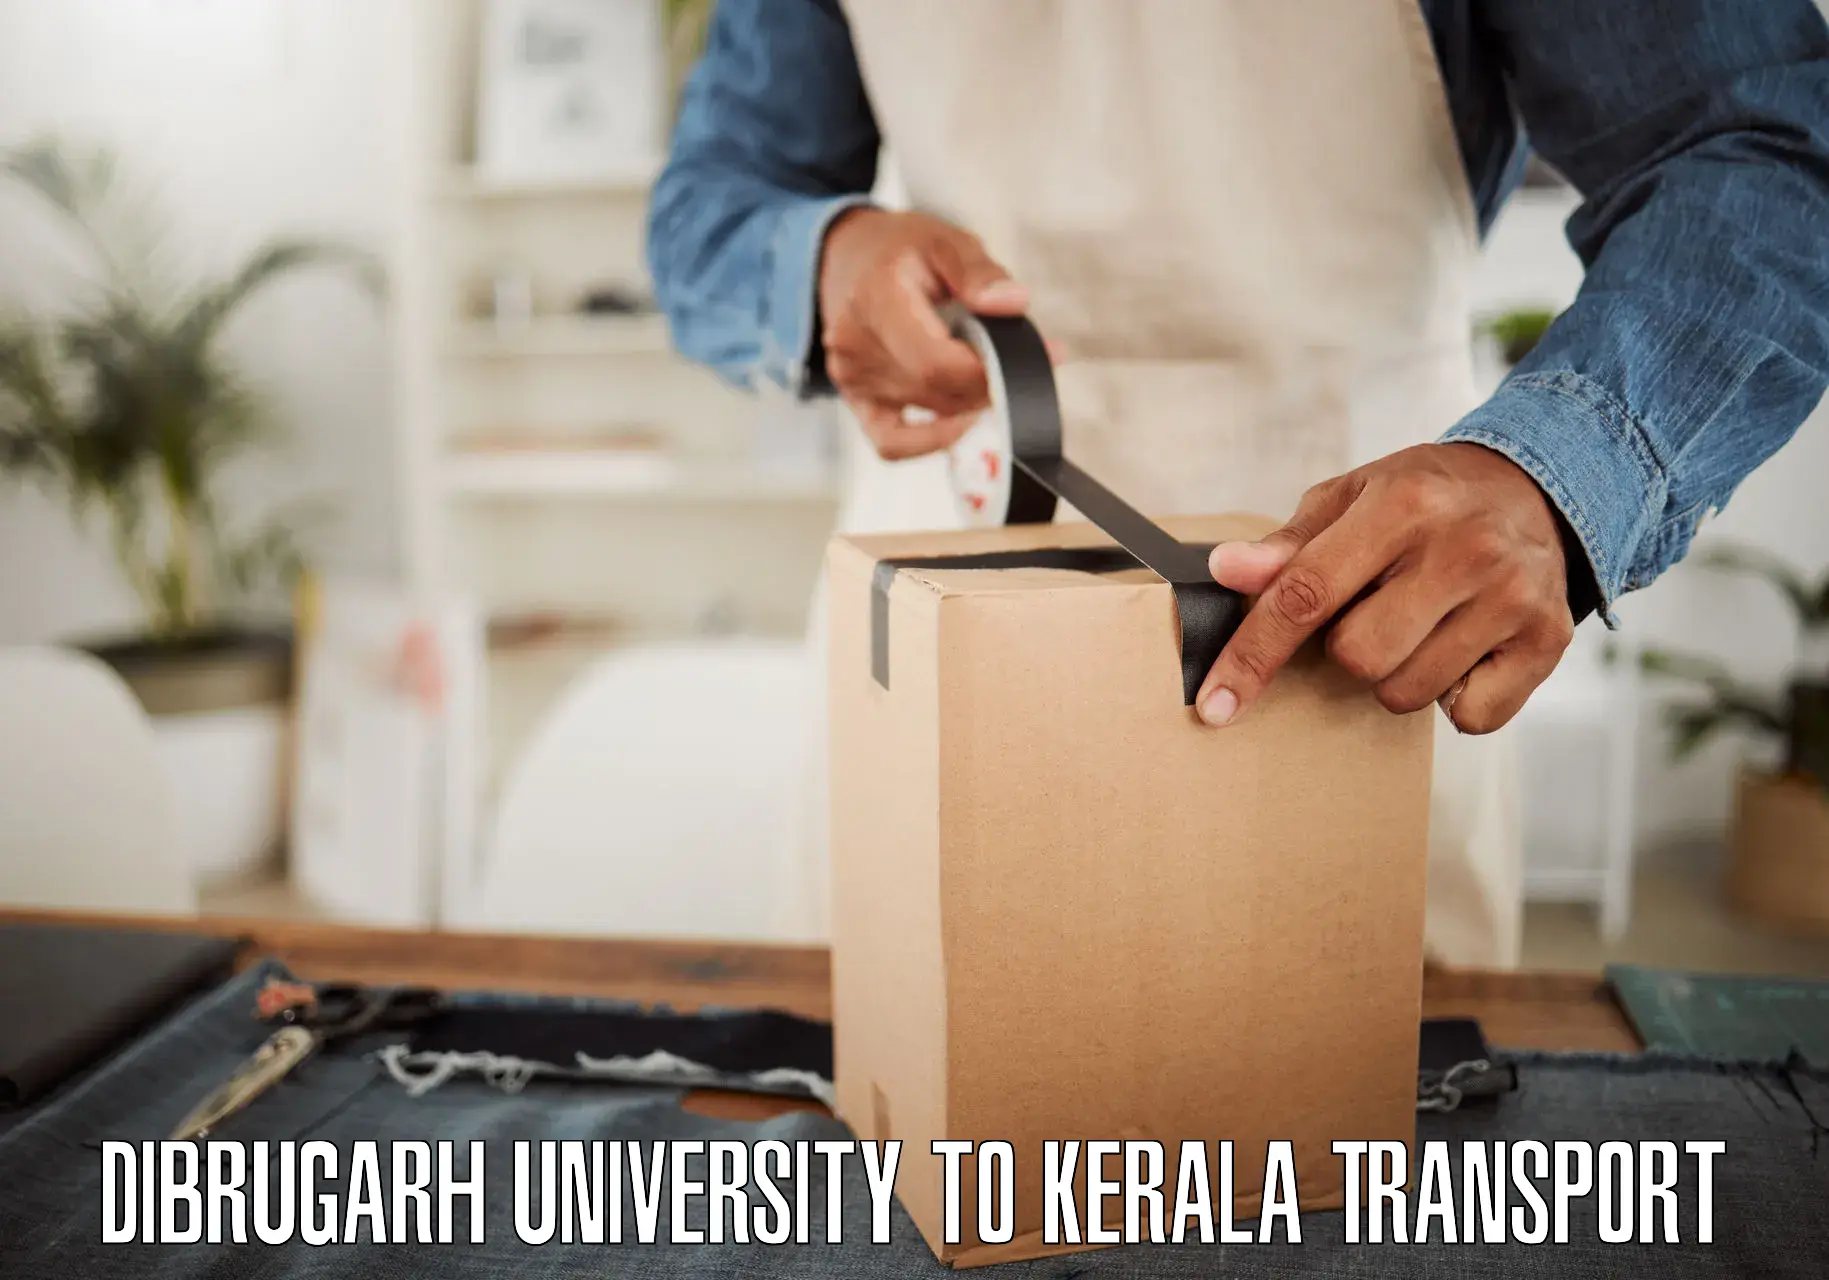 Container transportation services Dibrugarh University to Ernakulam